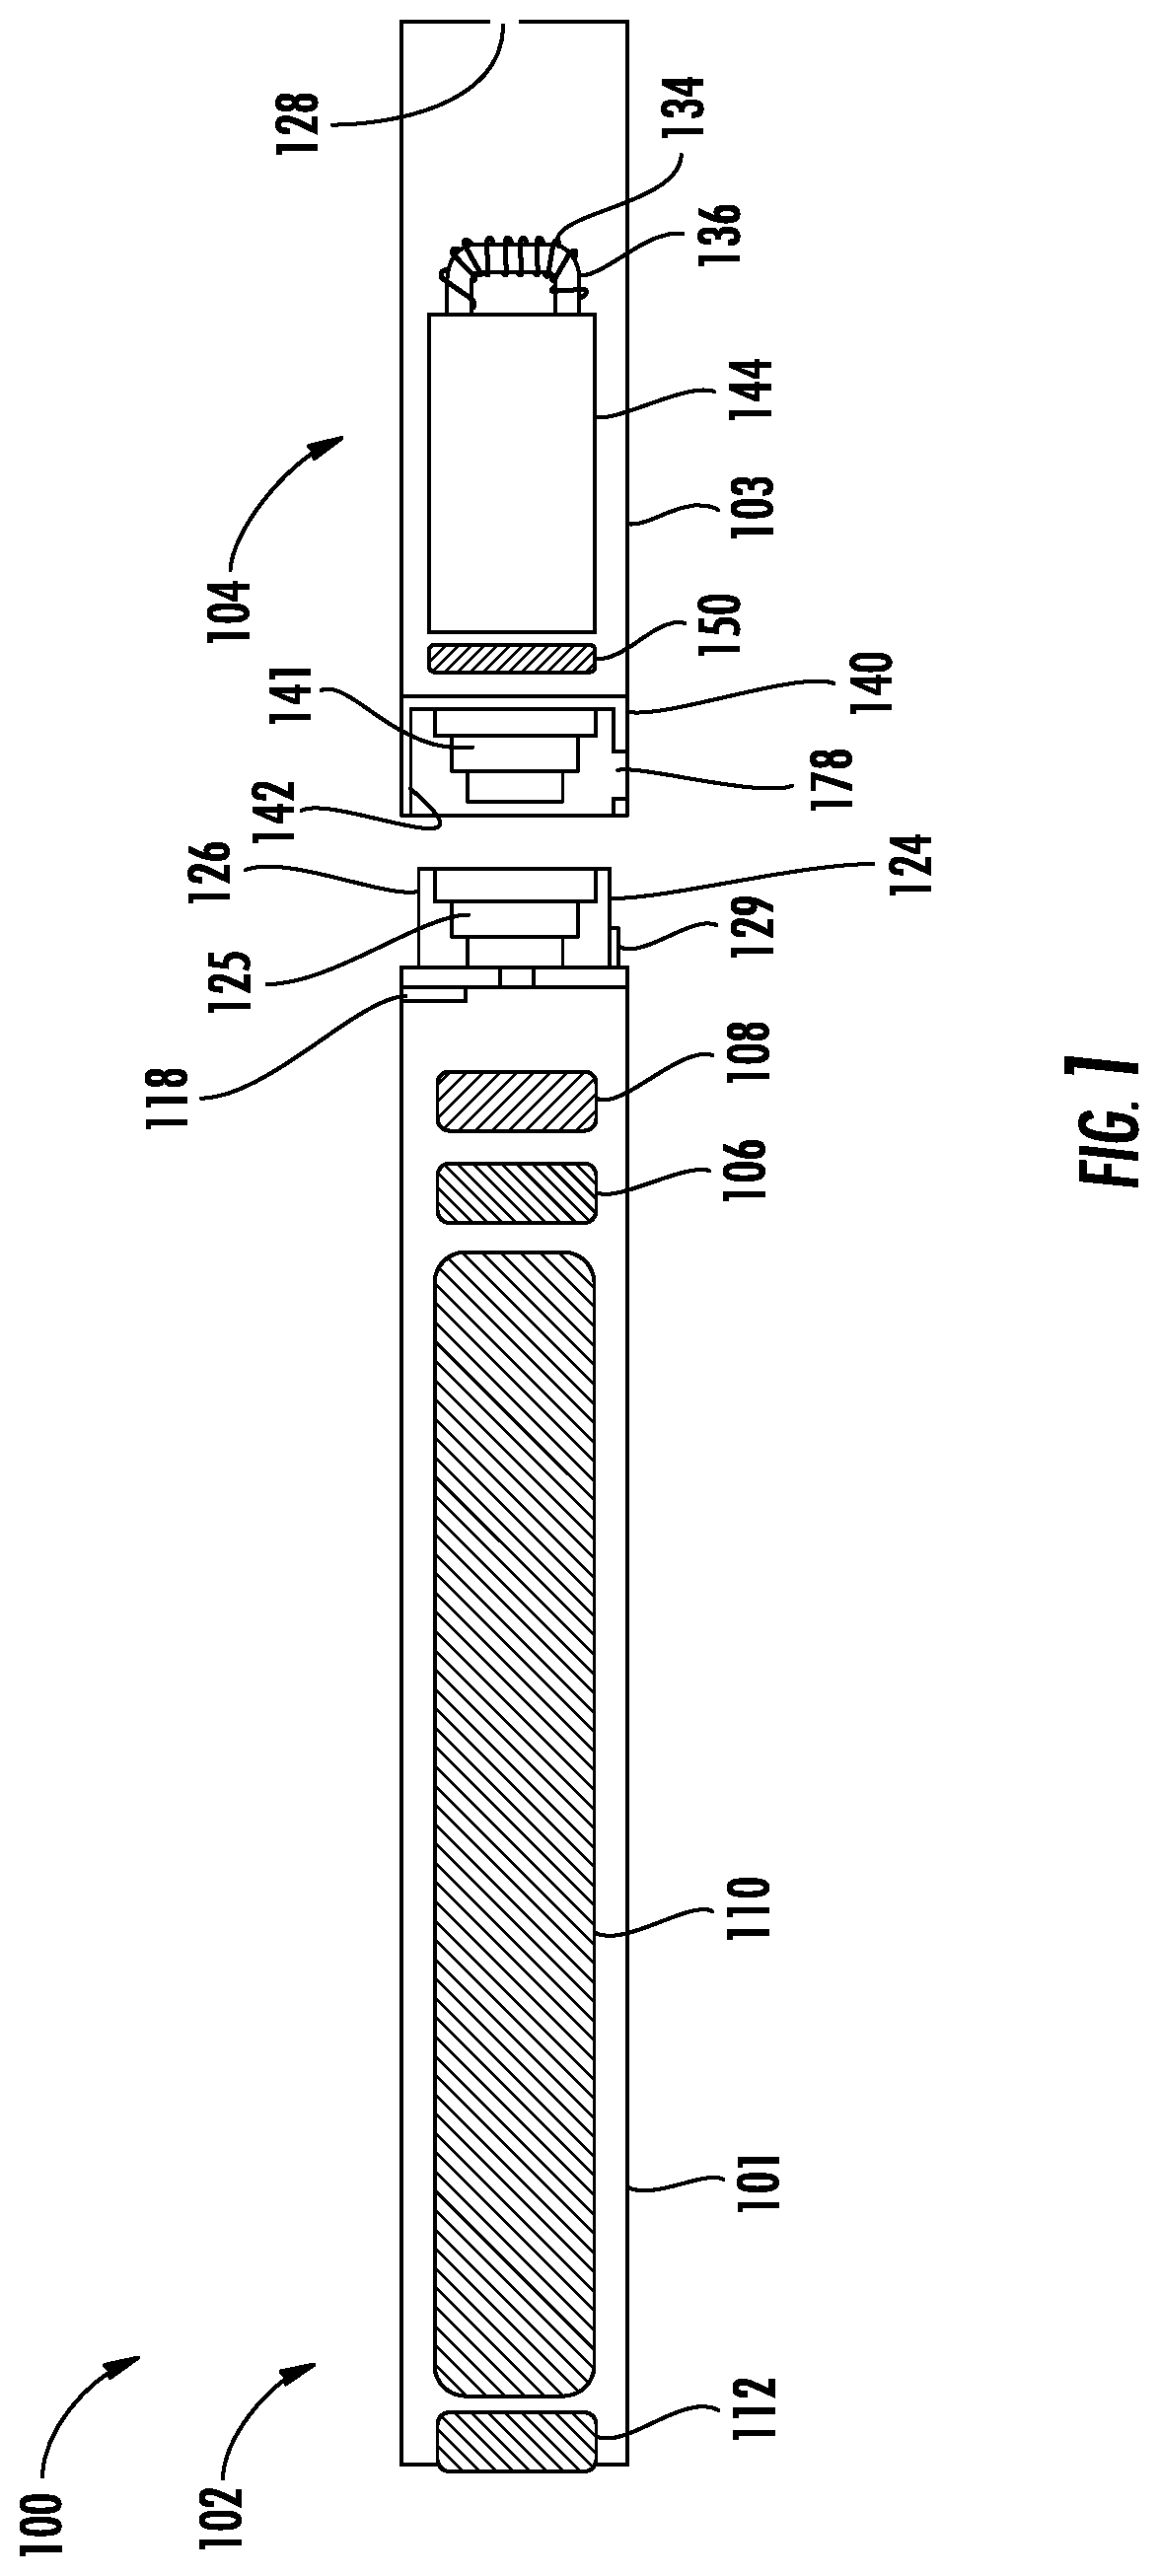 Atomizer and aerosol delivery device